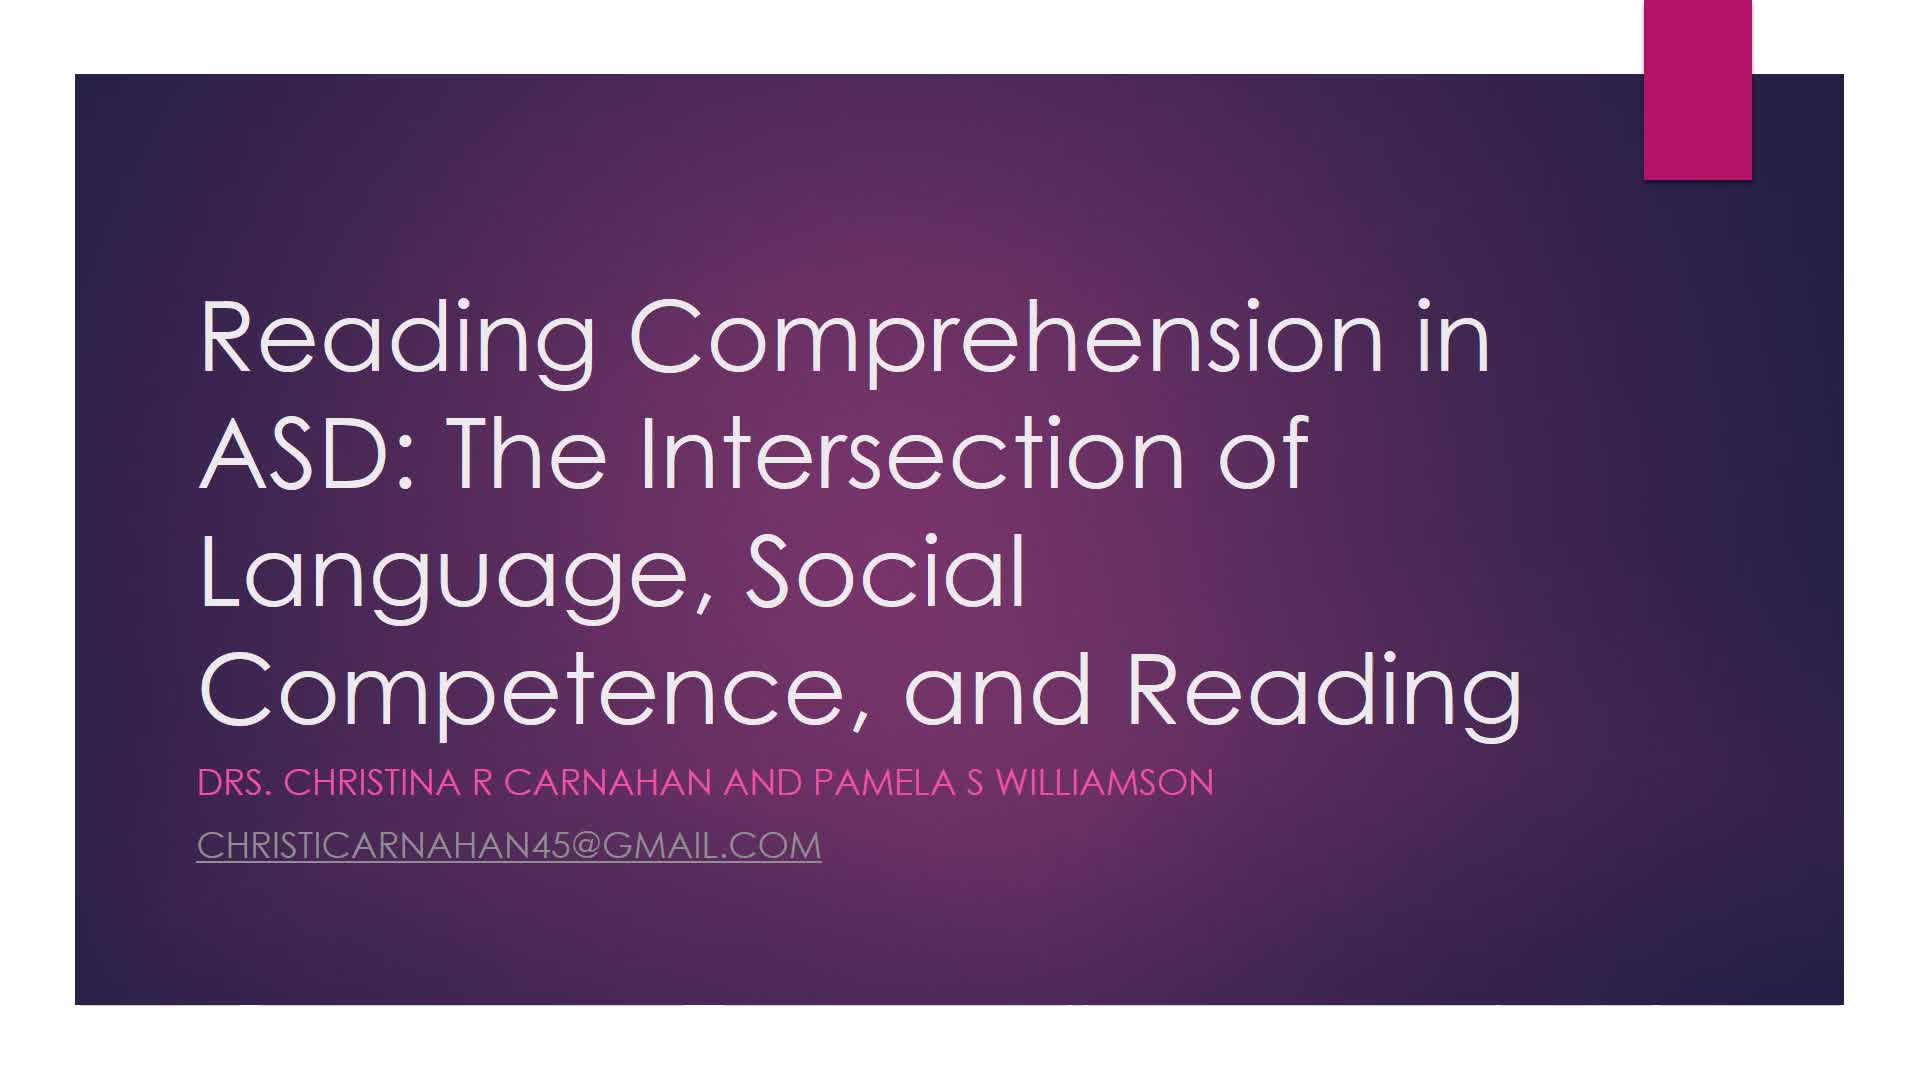 Reading Comprehension in ASD: The Intersection of Language, Social Competence, and Reading